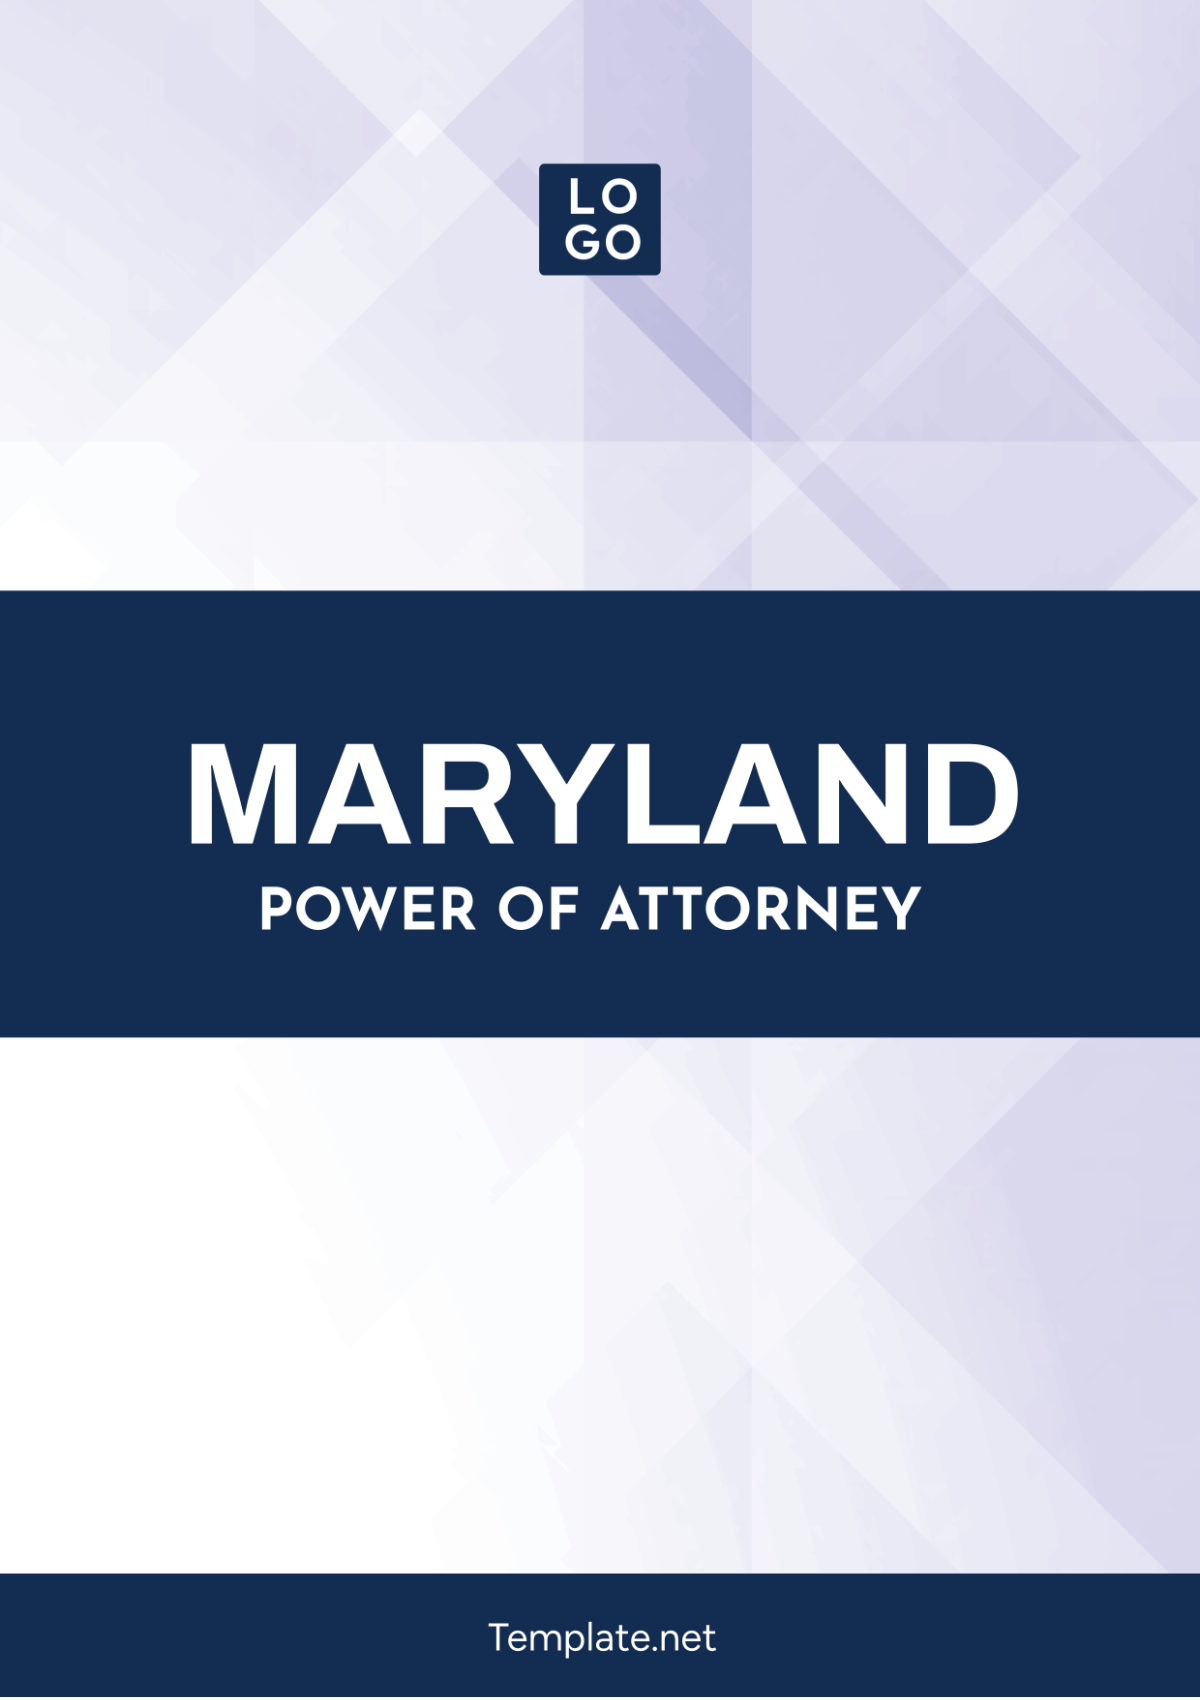 Maryland Power of Attorney Template